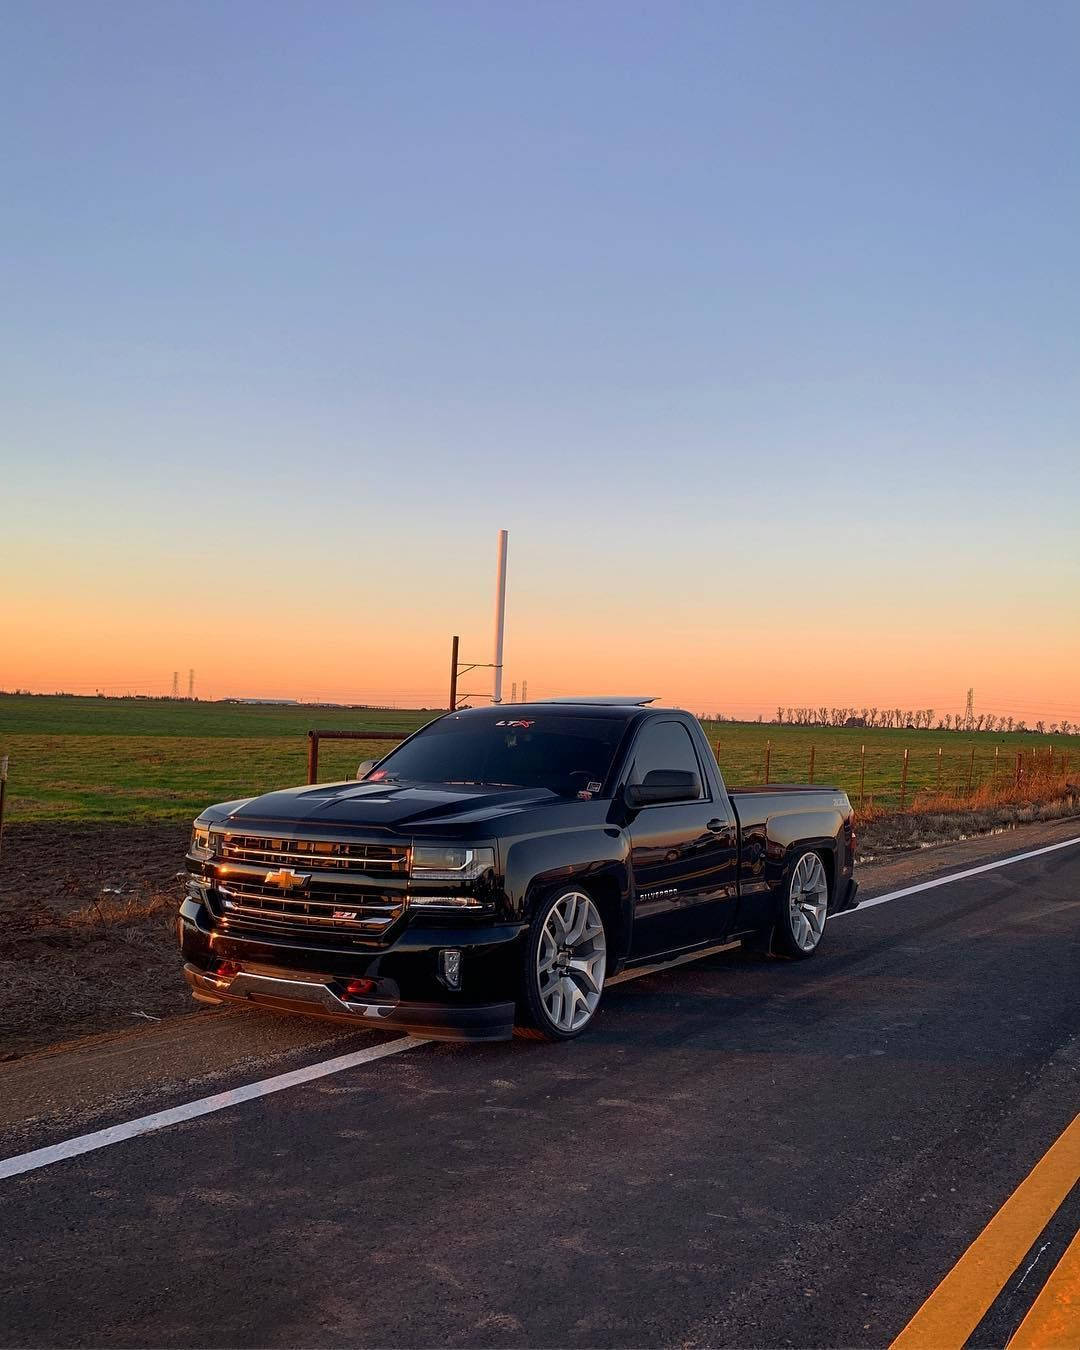 Black Dropped Truck Golden Hour Background